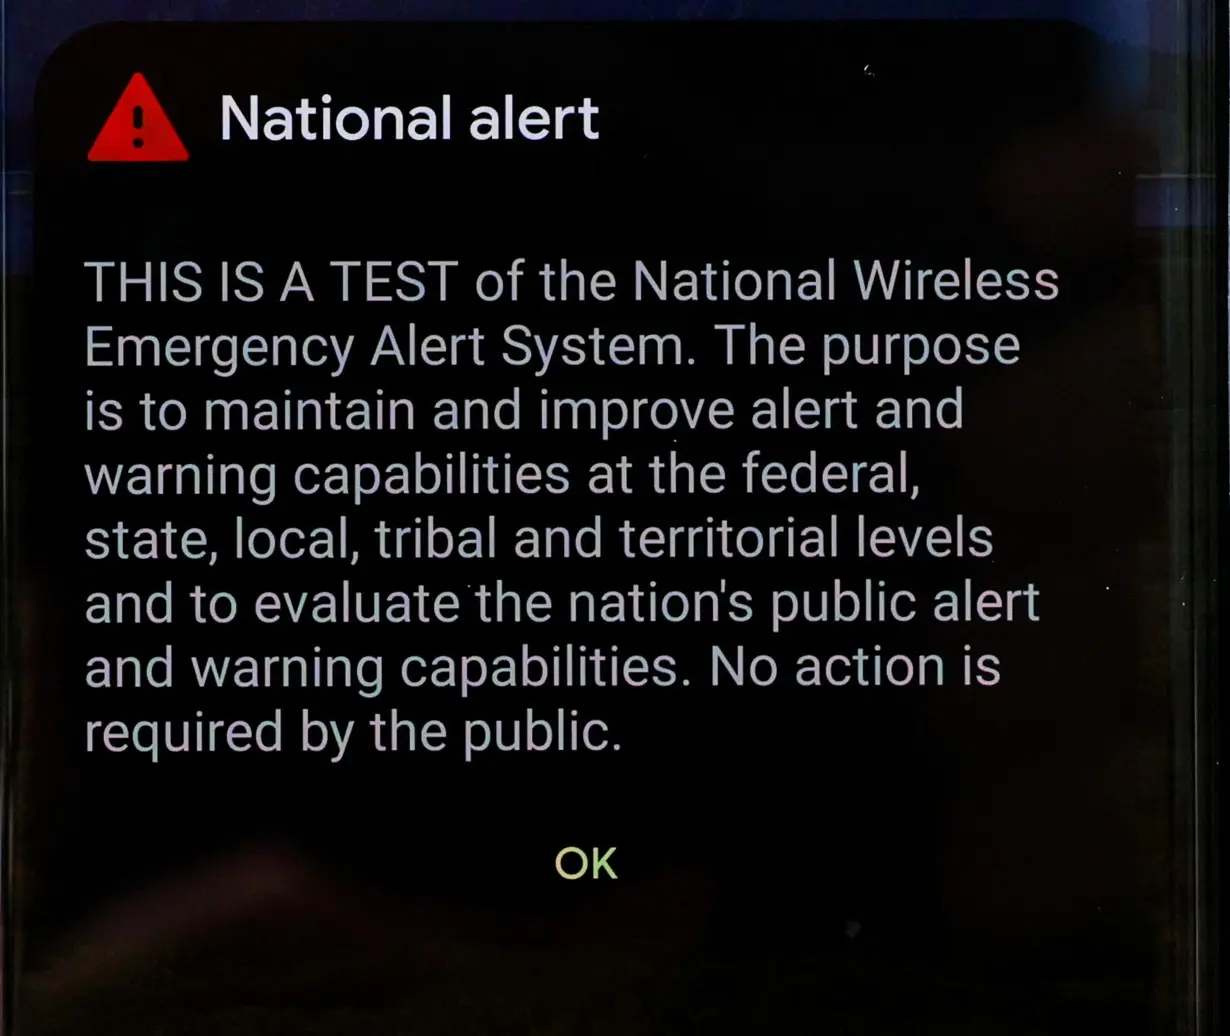 A National Alert is displayed on a phone from the National Wireless Emergency Alert System in New York